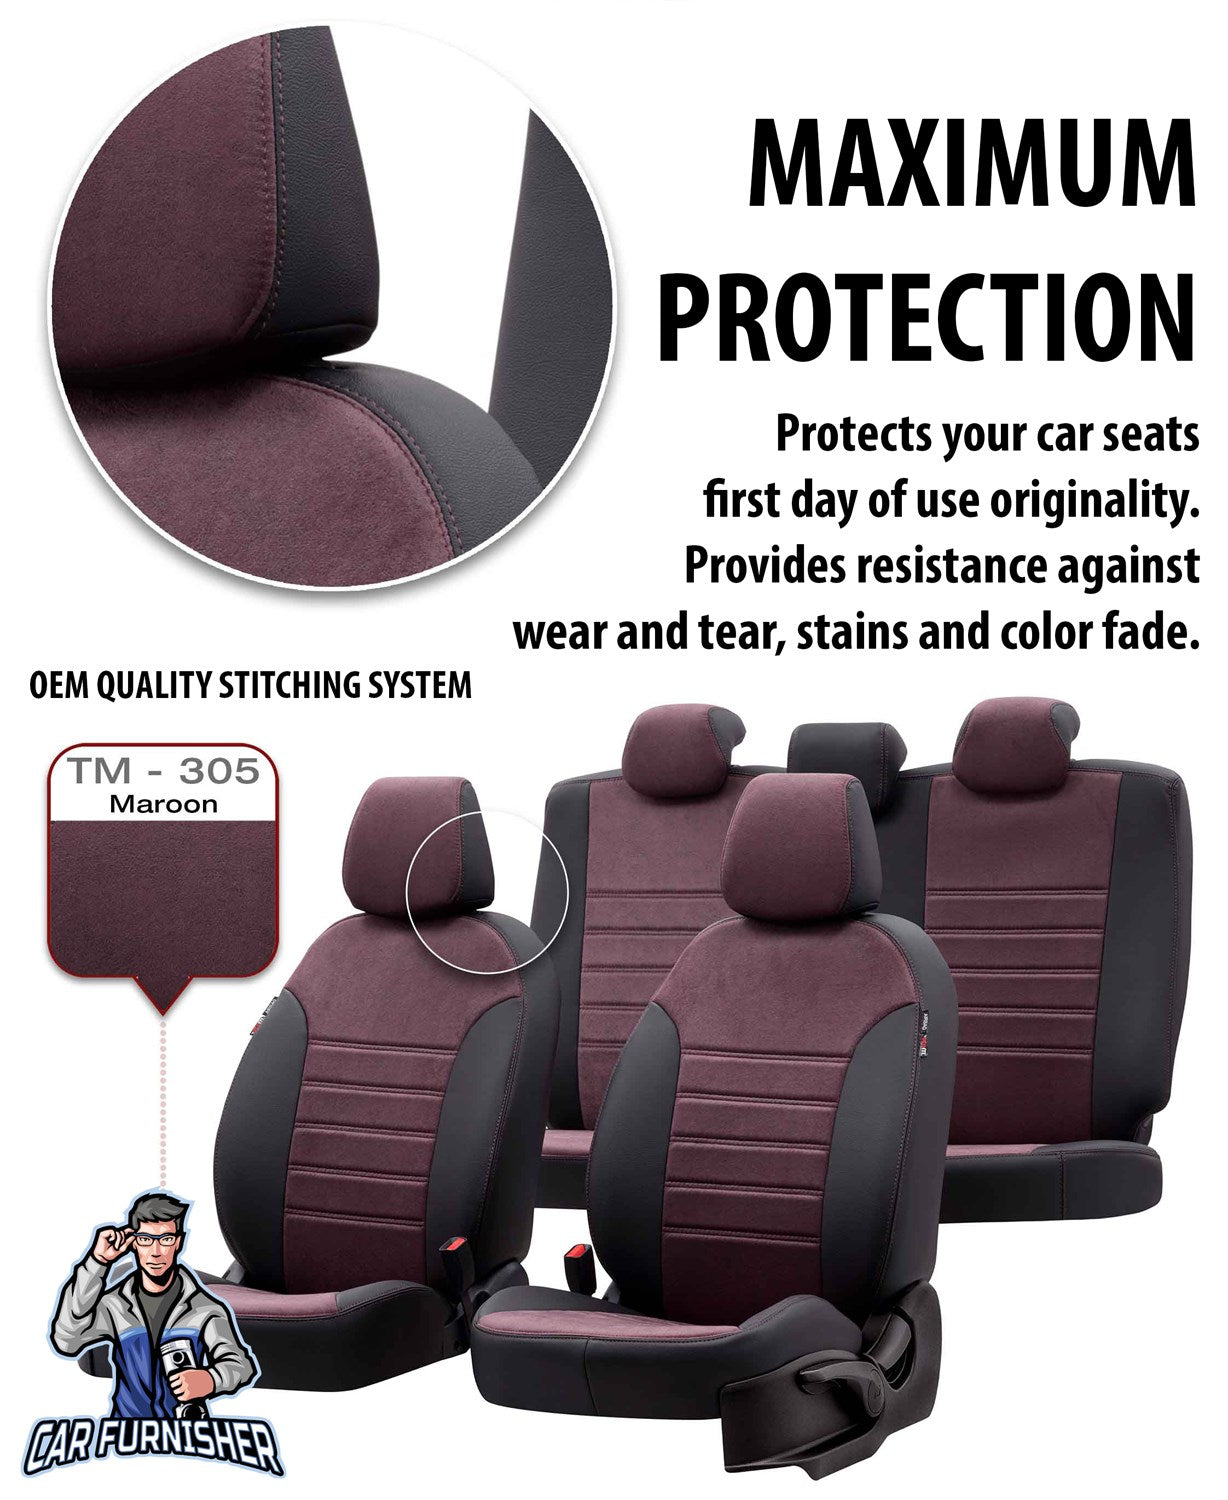 Volkswagen Sharan Seat Cover Milano Suede Design Black Leather & Suede Fabric